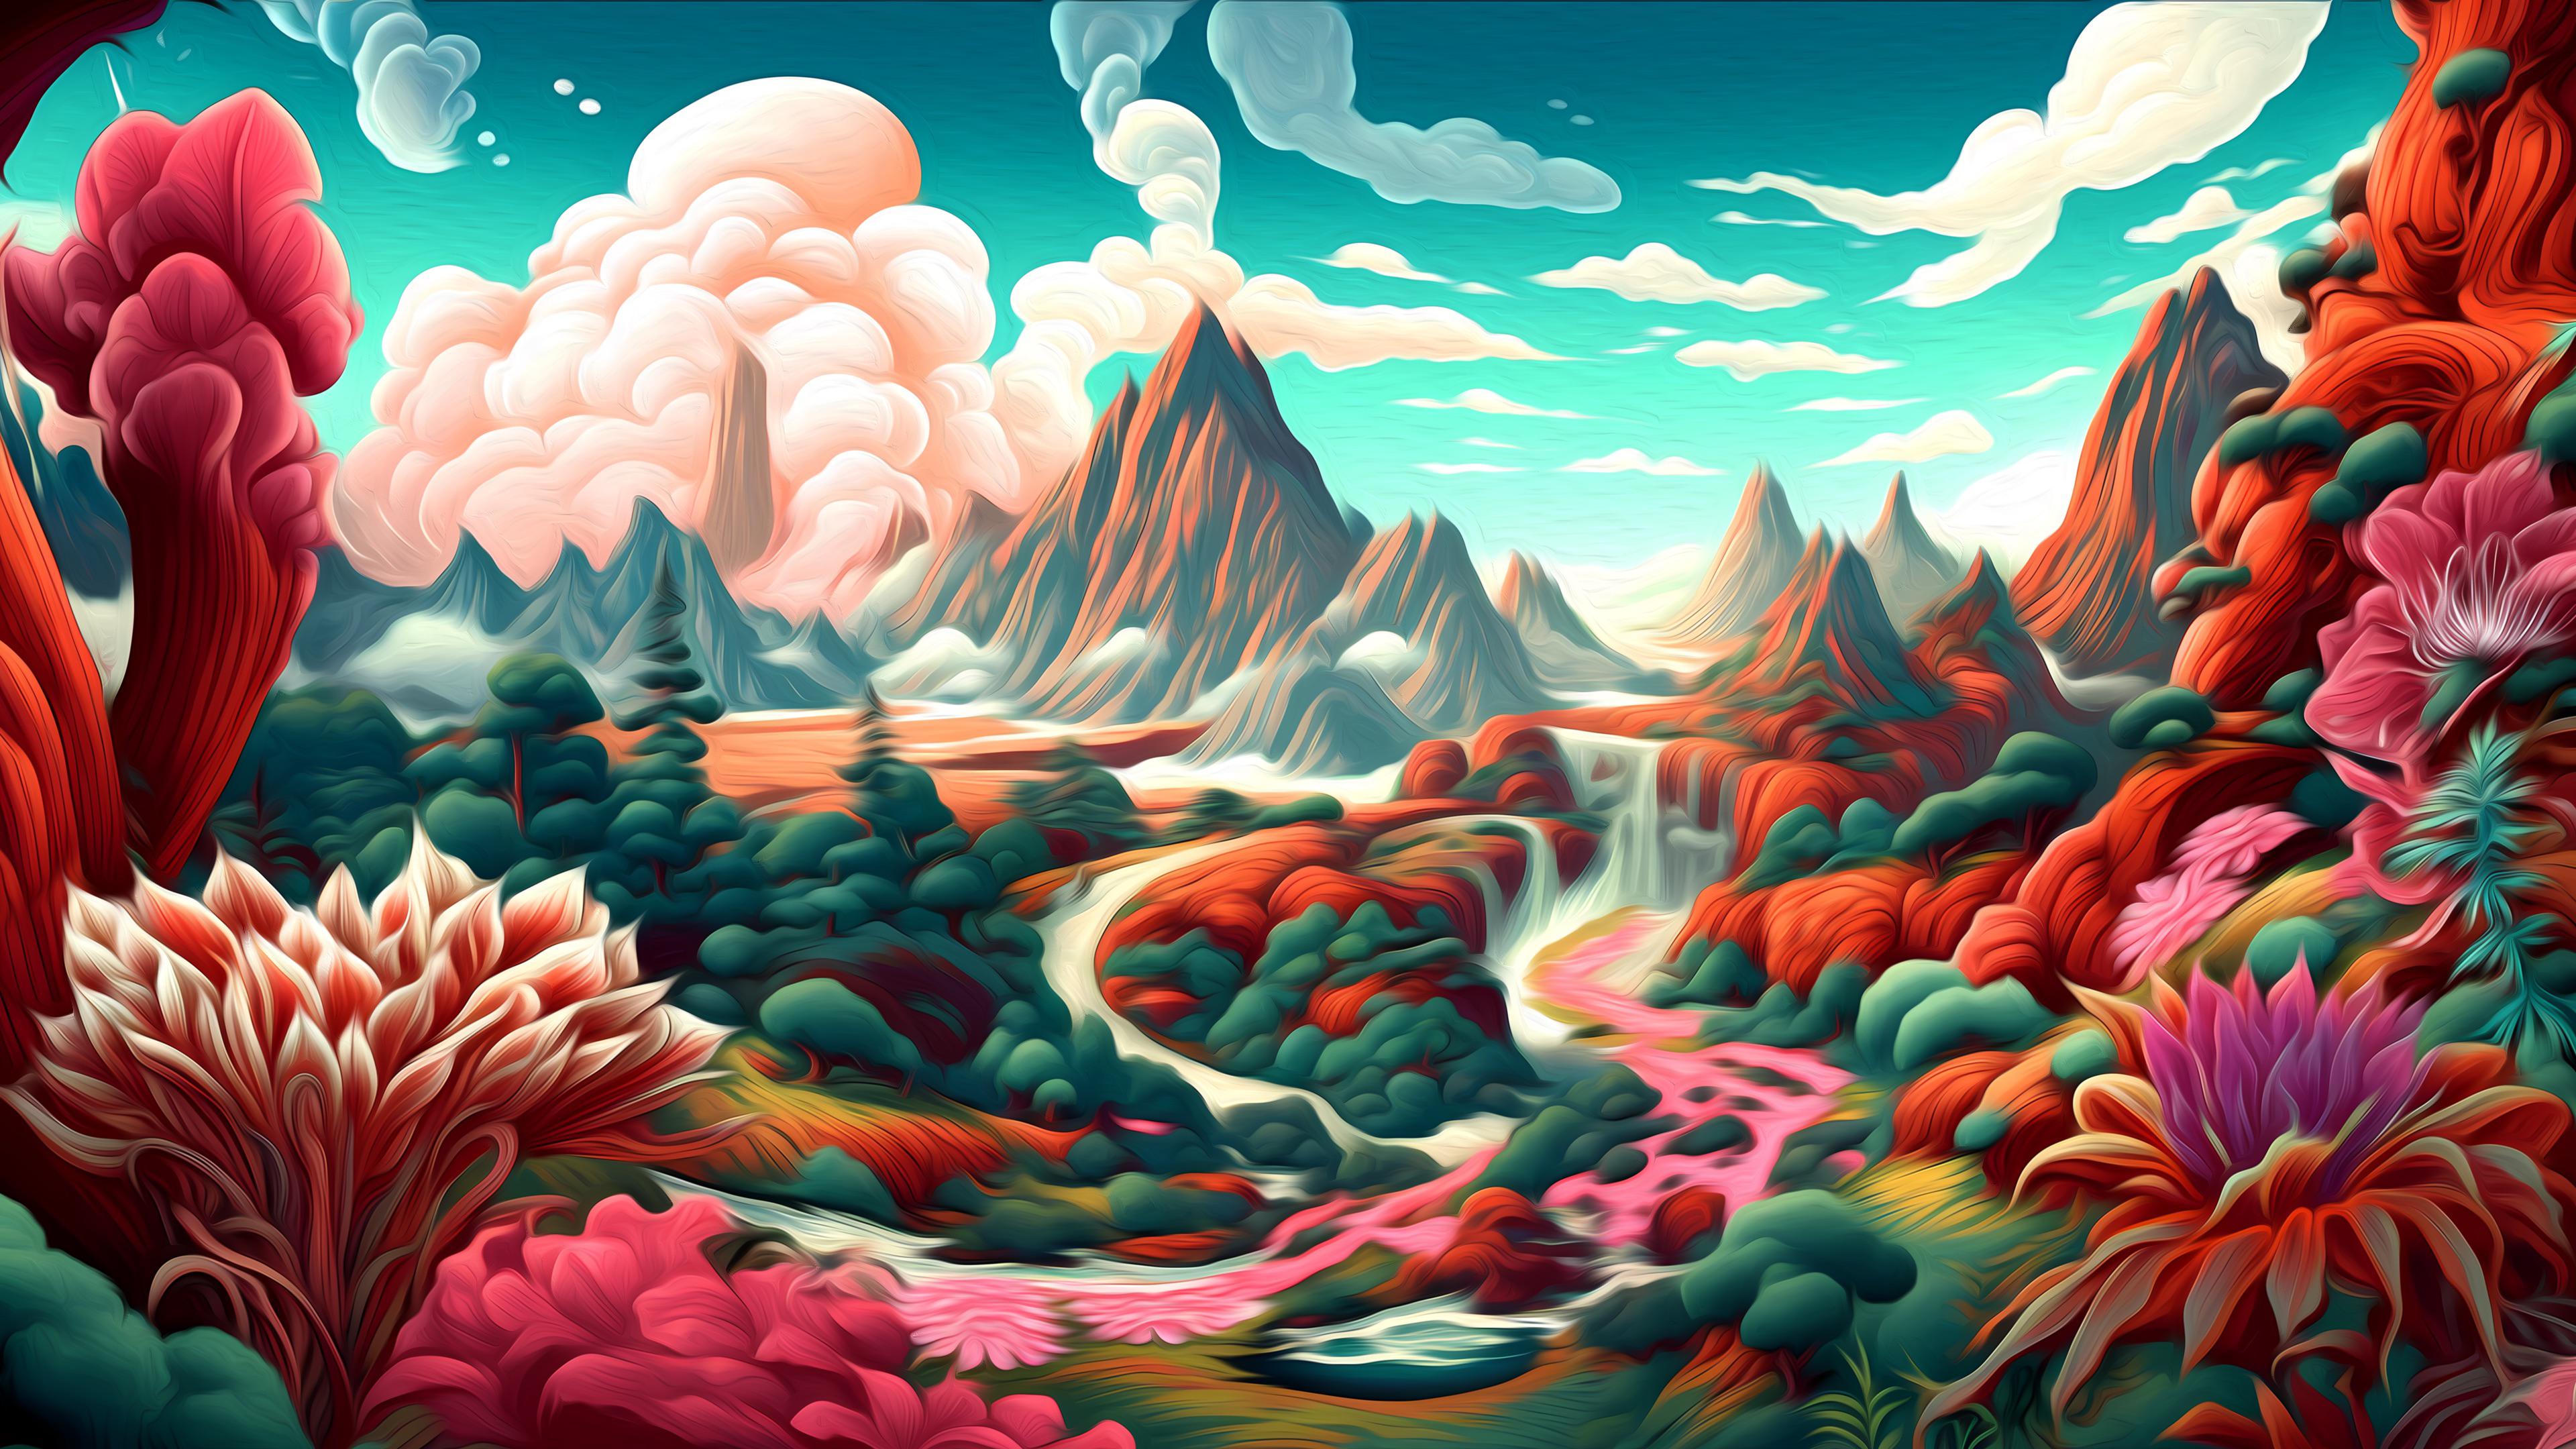 4K WALLPAPER: Aesthetic and Colorful Abstract Mountain Landscape